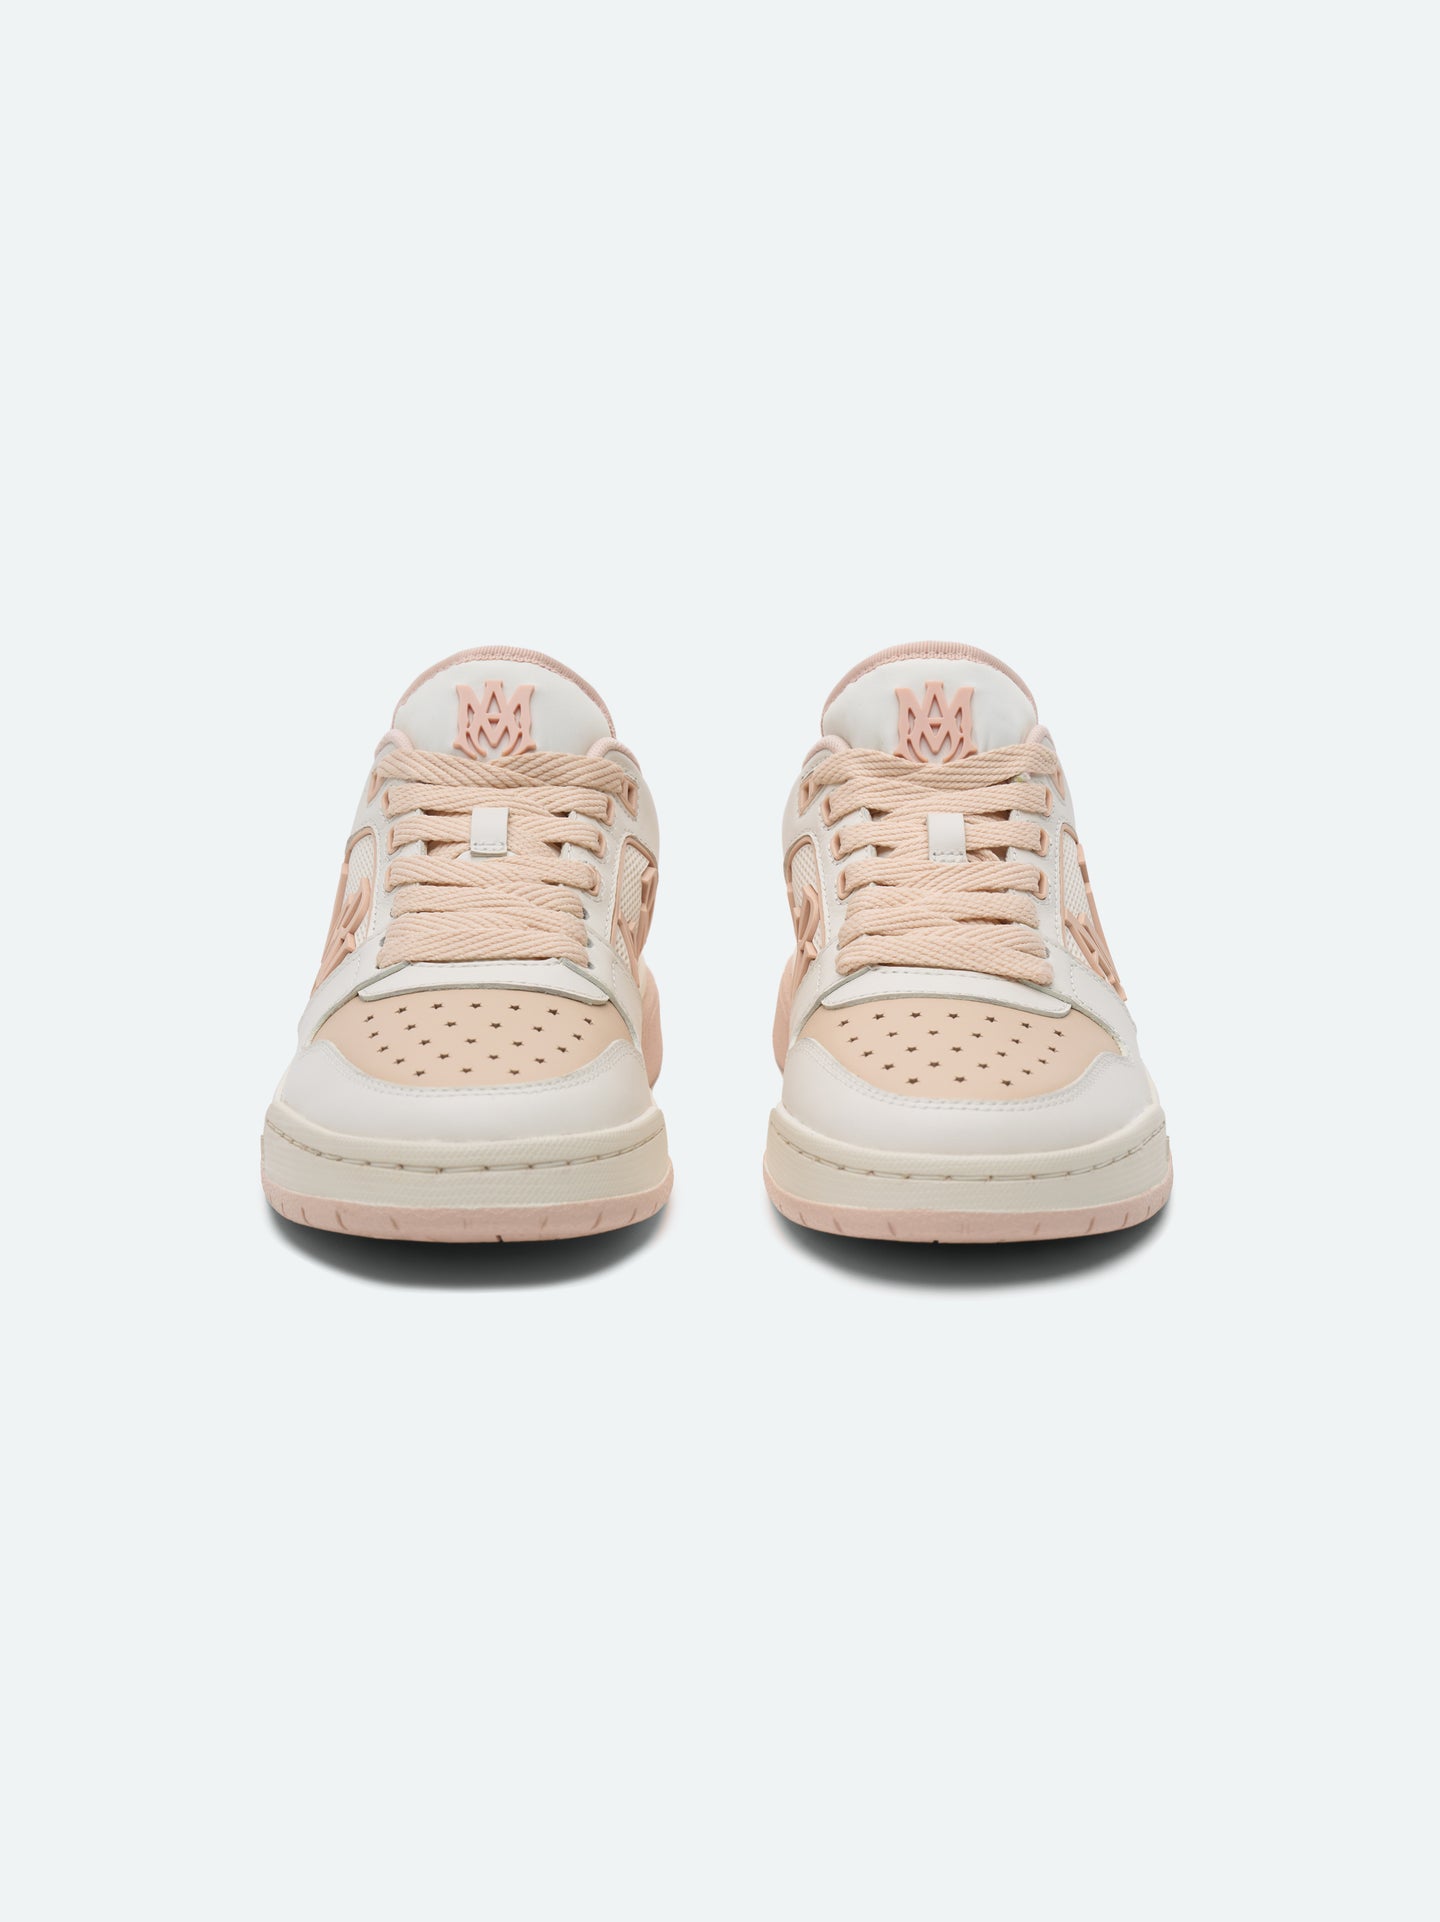 WOMEN - CLASSIC LOW - White Pink